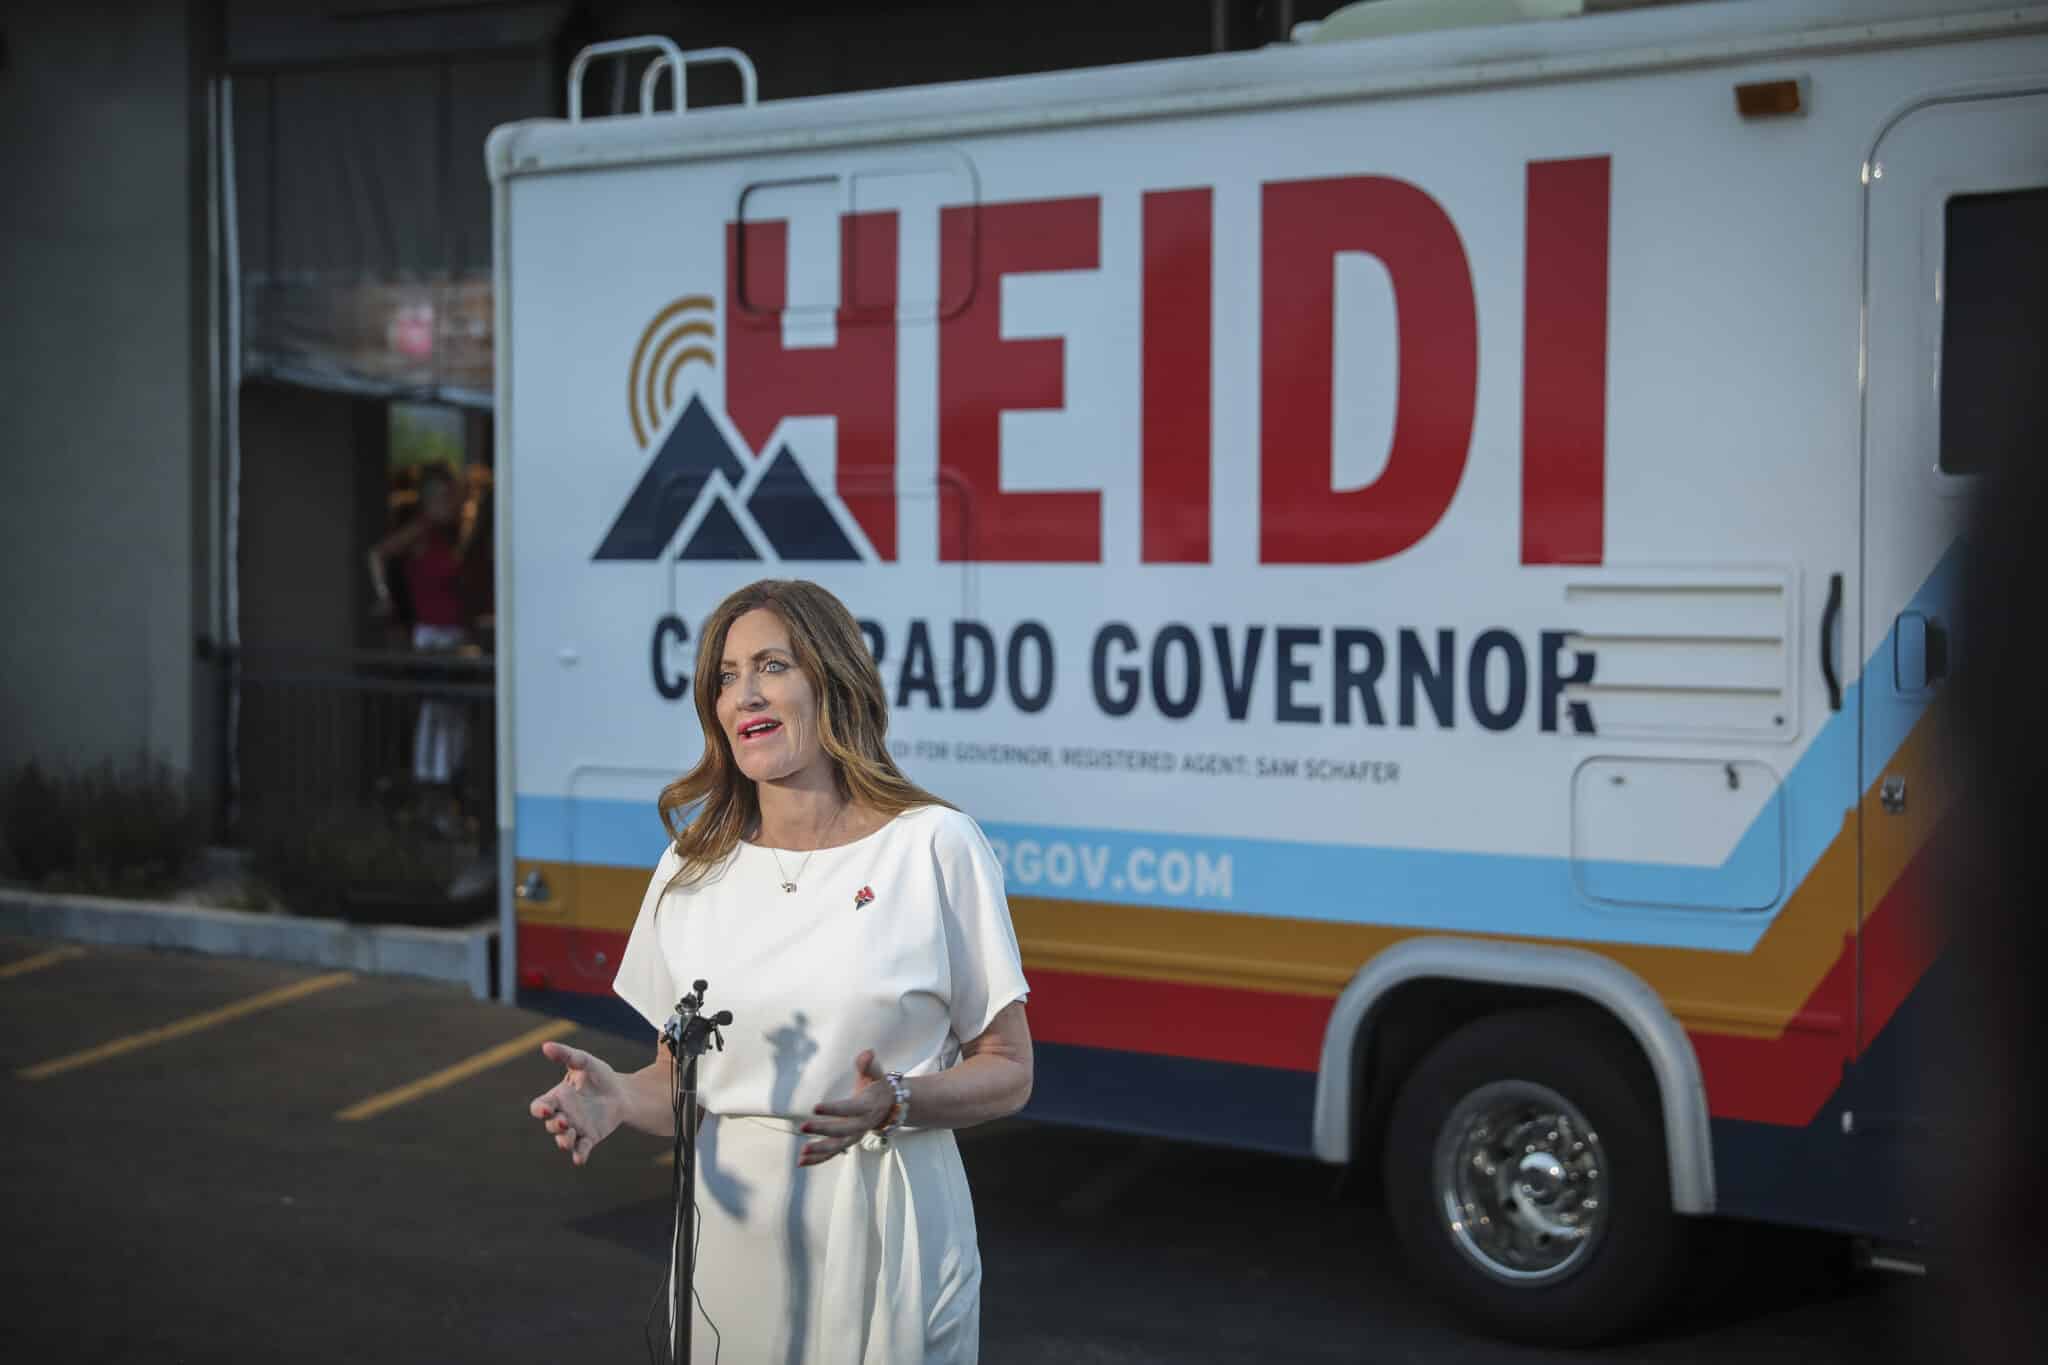 SEDALIA, CO - JUNE 28: Colorado Republican gubernatorial candidate Heidi Ganahl addresses the media after a watch party at the Wide Open Saloon on June 28, 2022 in Sedalia, Colorado. Ganahl defeated Greg Lopez in the Republican primary and will take on Democratic incumbent Jared Polis in November. (Photo by Marc Piscotty/Getty Images)